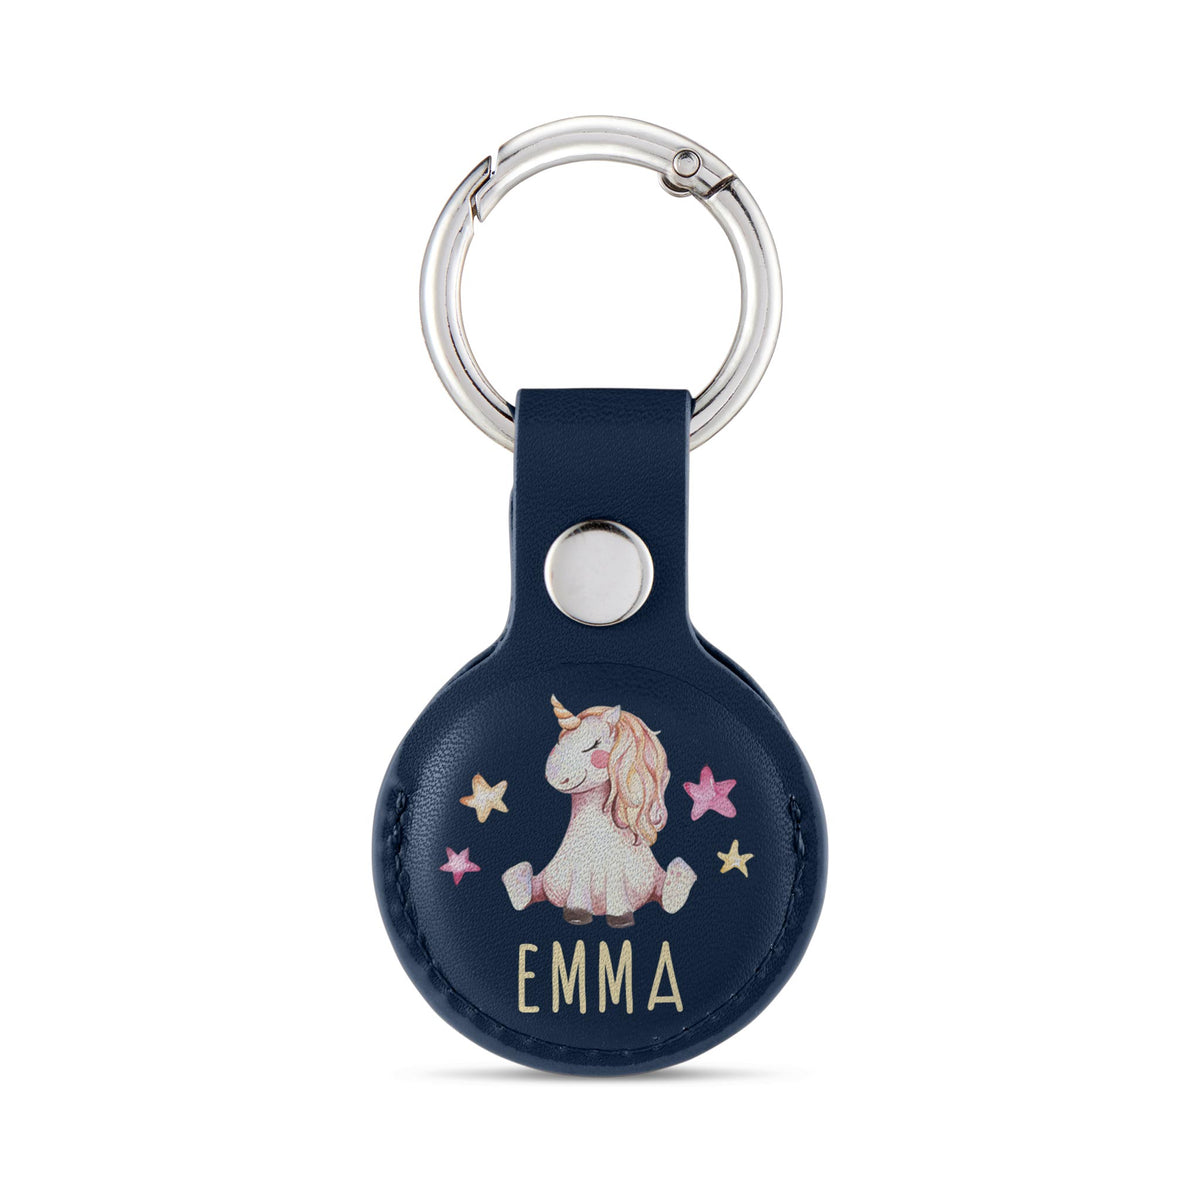 Personalised AirTag Case Keyring Holder Keychain Holder for Air Tag Tracking Device Unicorn Stars Name on Blue